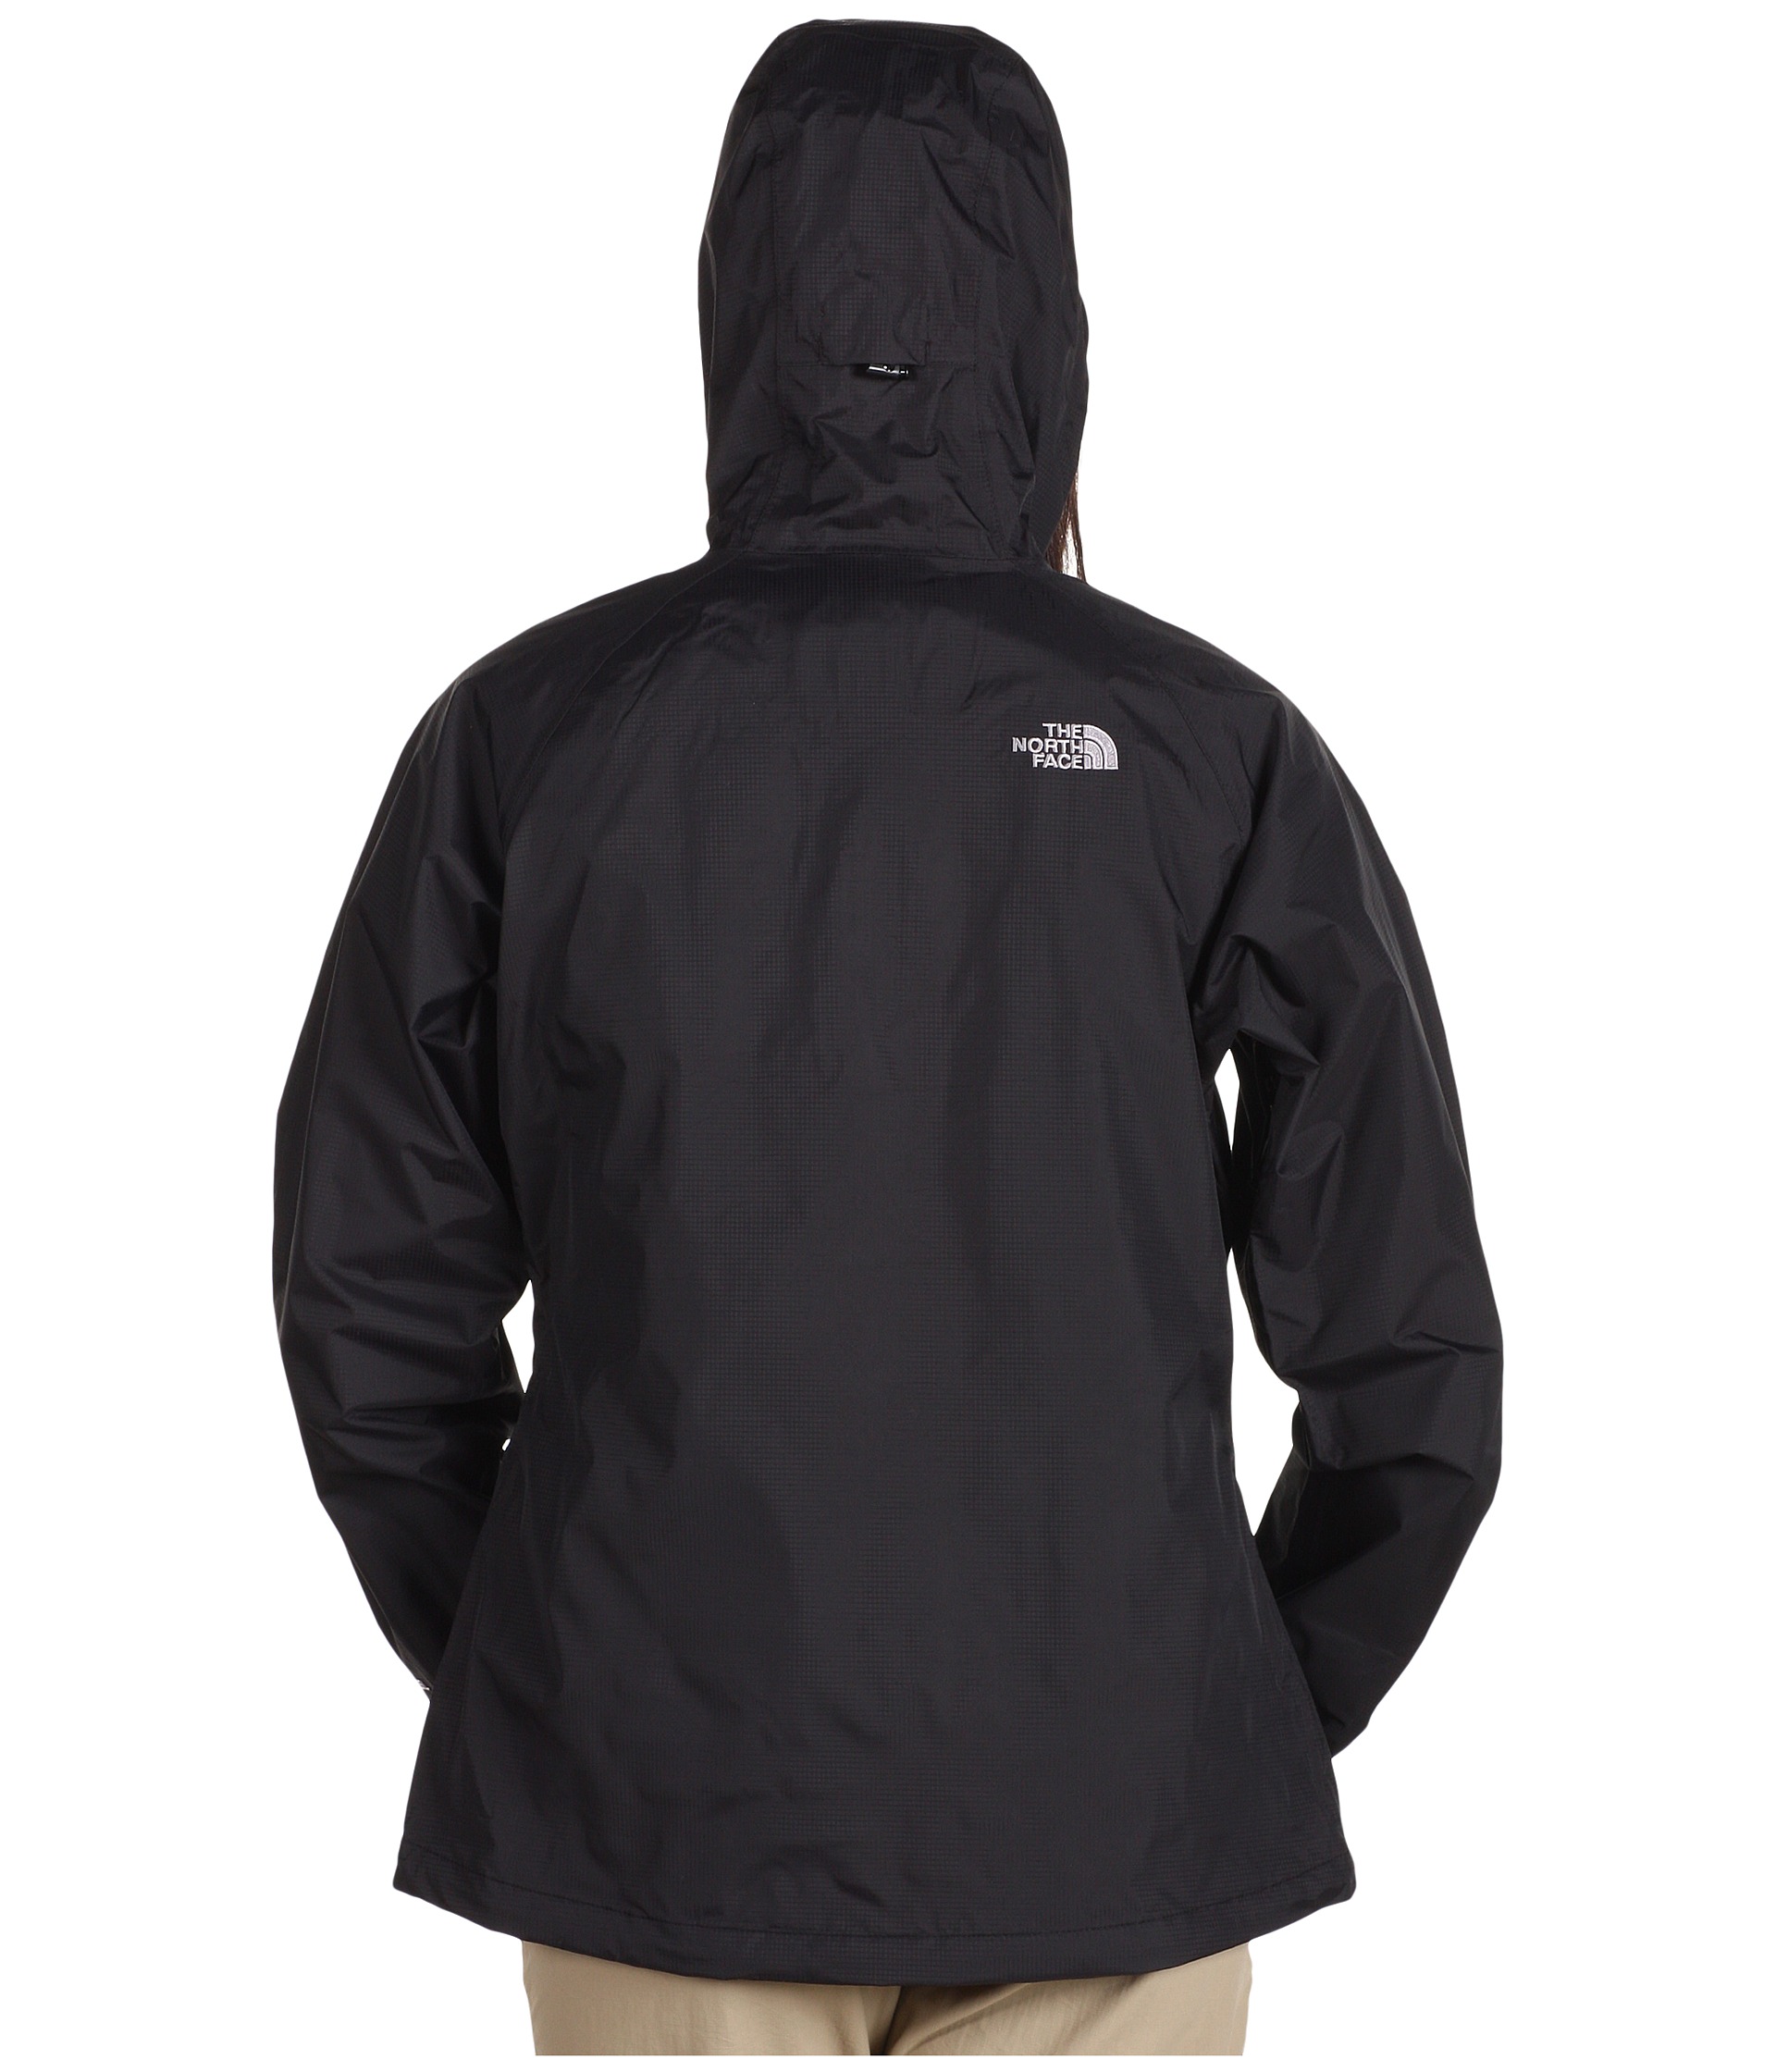 The North Face Venture Jacket - Zappos.com Free Shipping BOTH Ways